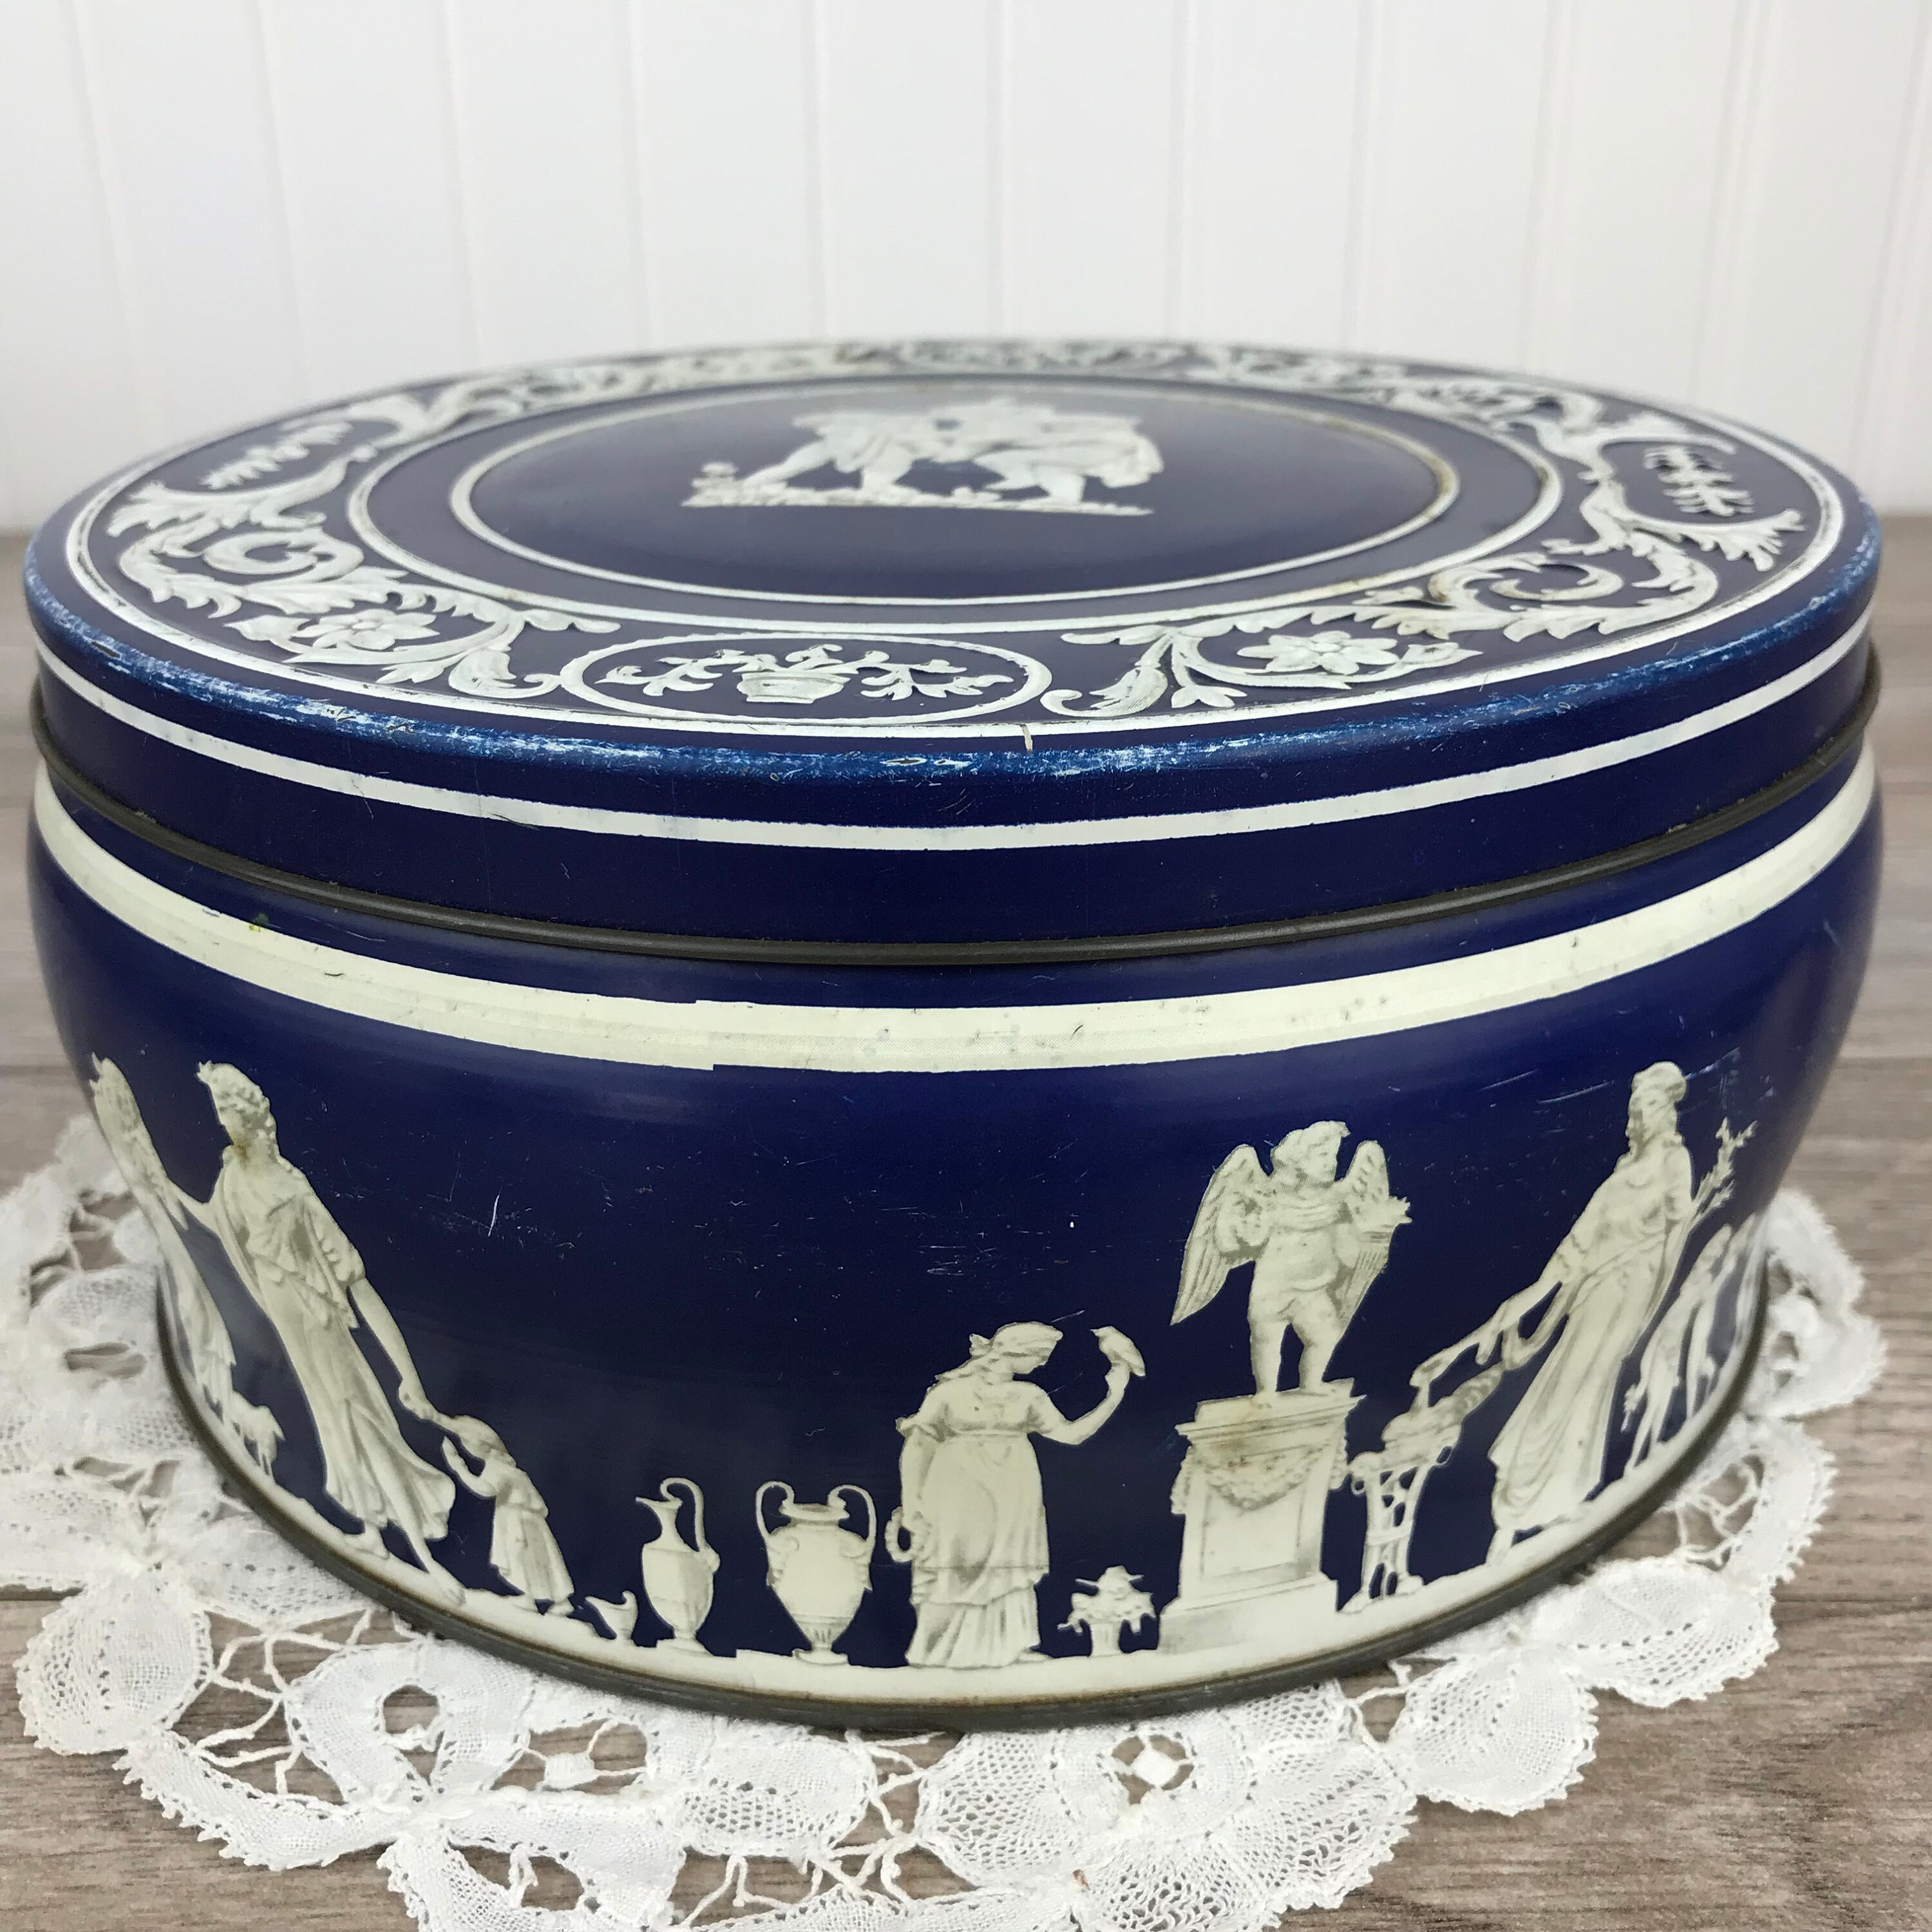 Vintage Huntley & Palmers Biscuits Tin, Mid-century Cookie Tin, Greek  Themed, Cherub, Cobalt Blue, London England, Old Round Cookie Tin -   Canada